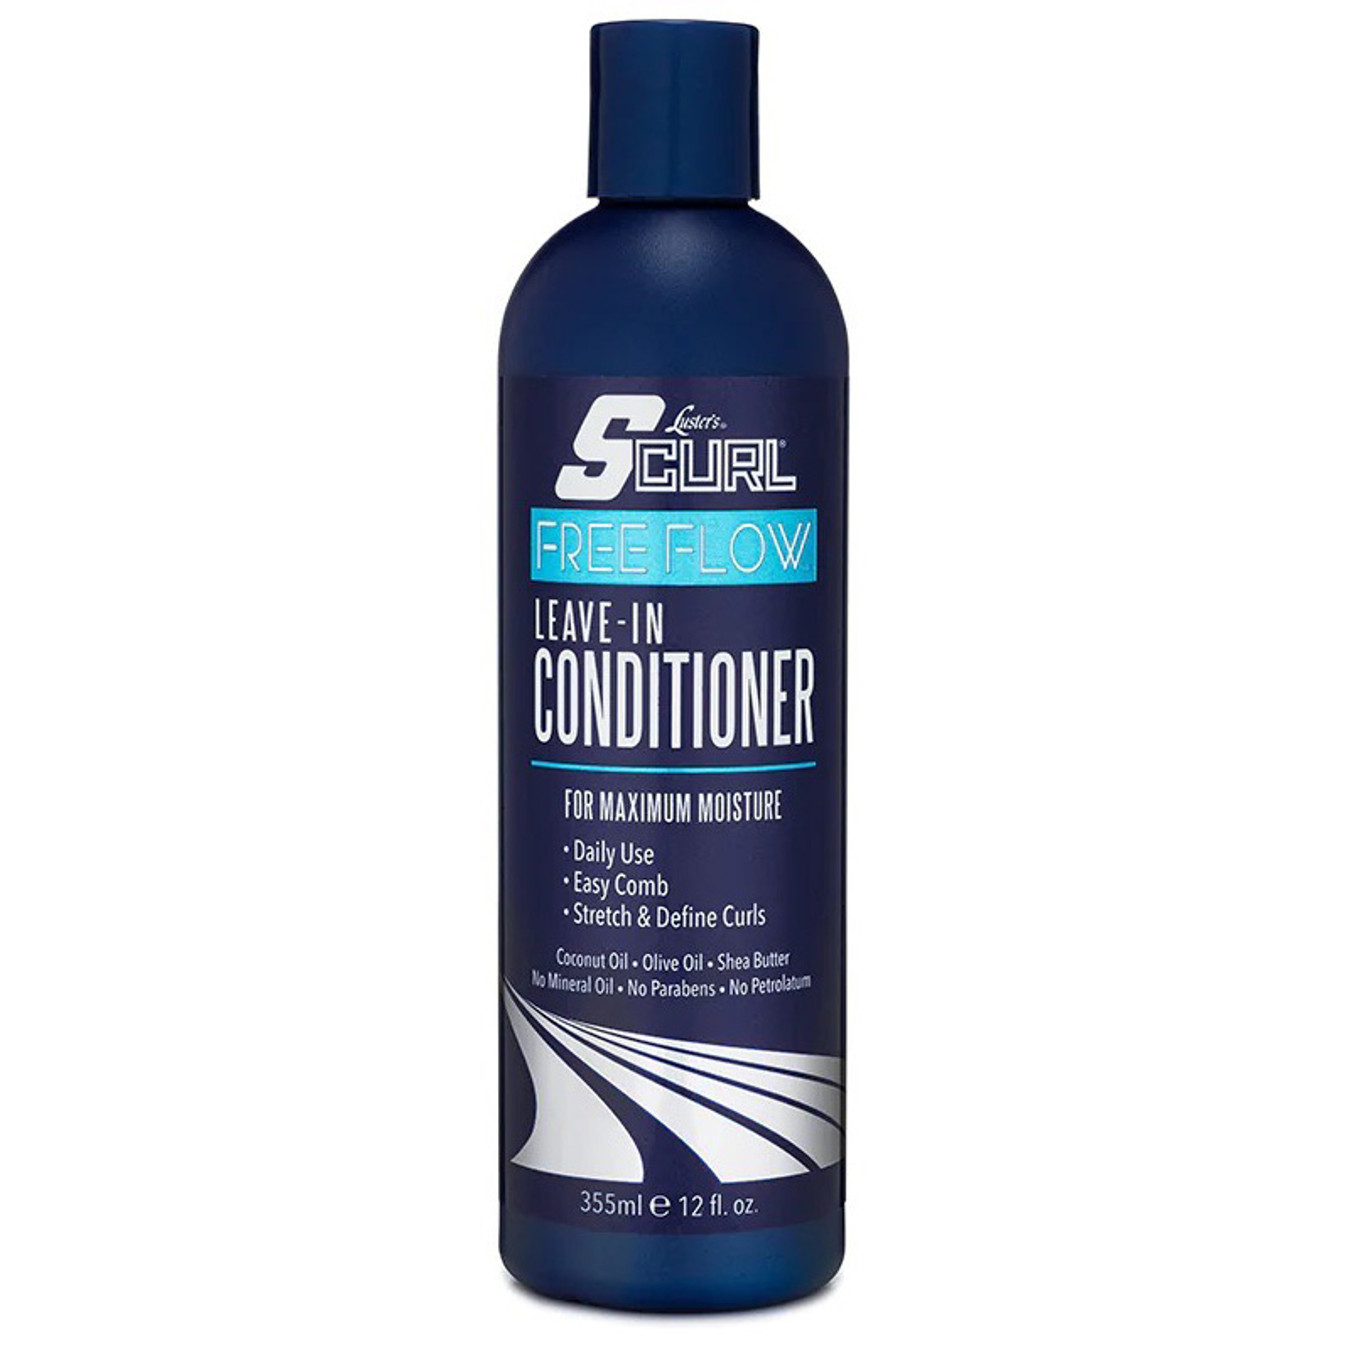 Lusters Scurl Free Flow Leave-In Conditioner (12 oz)